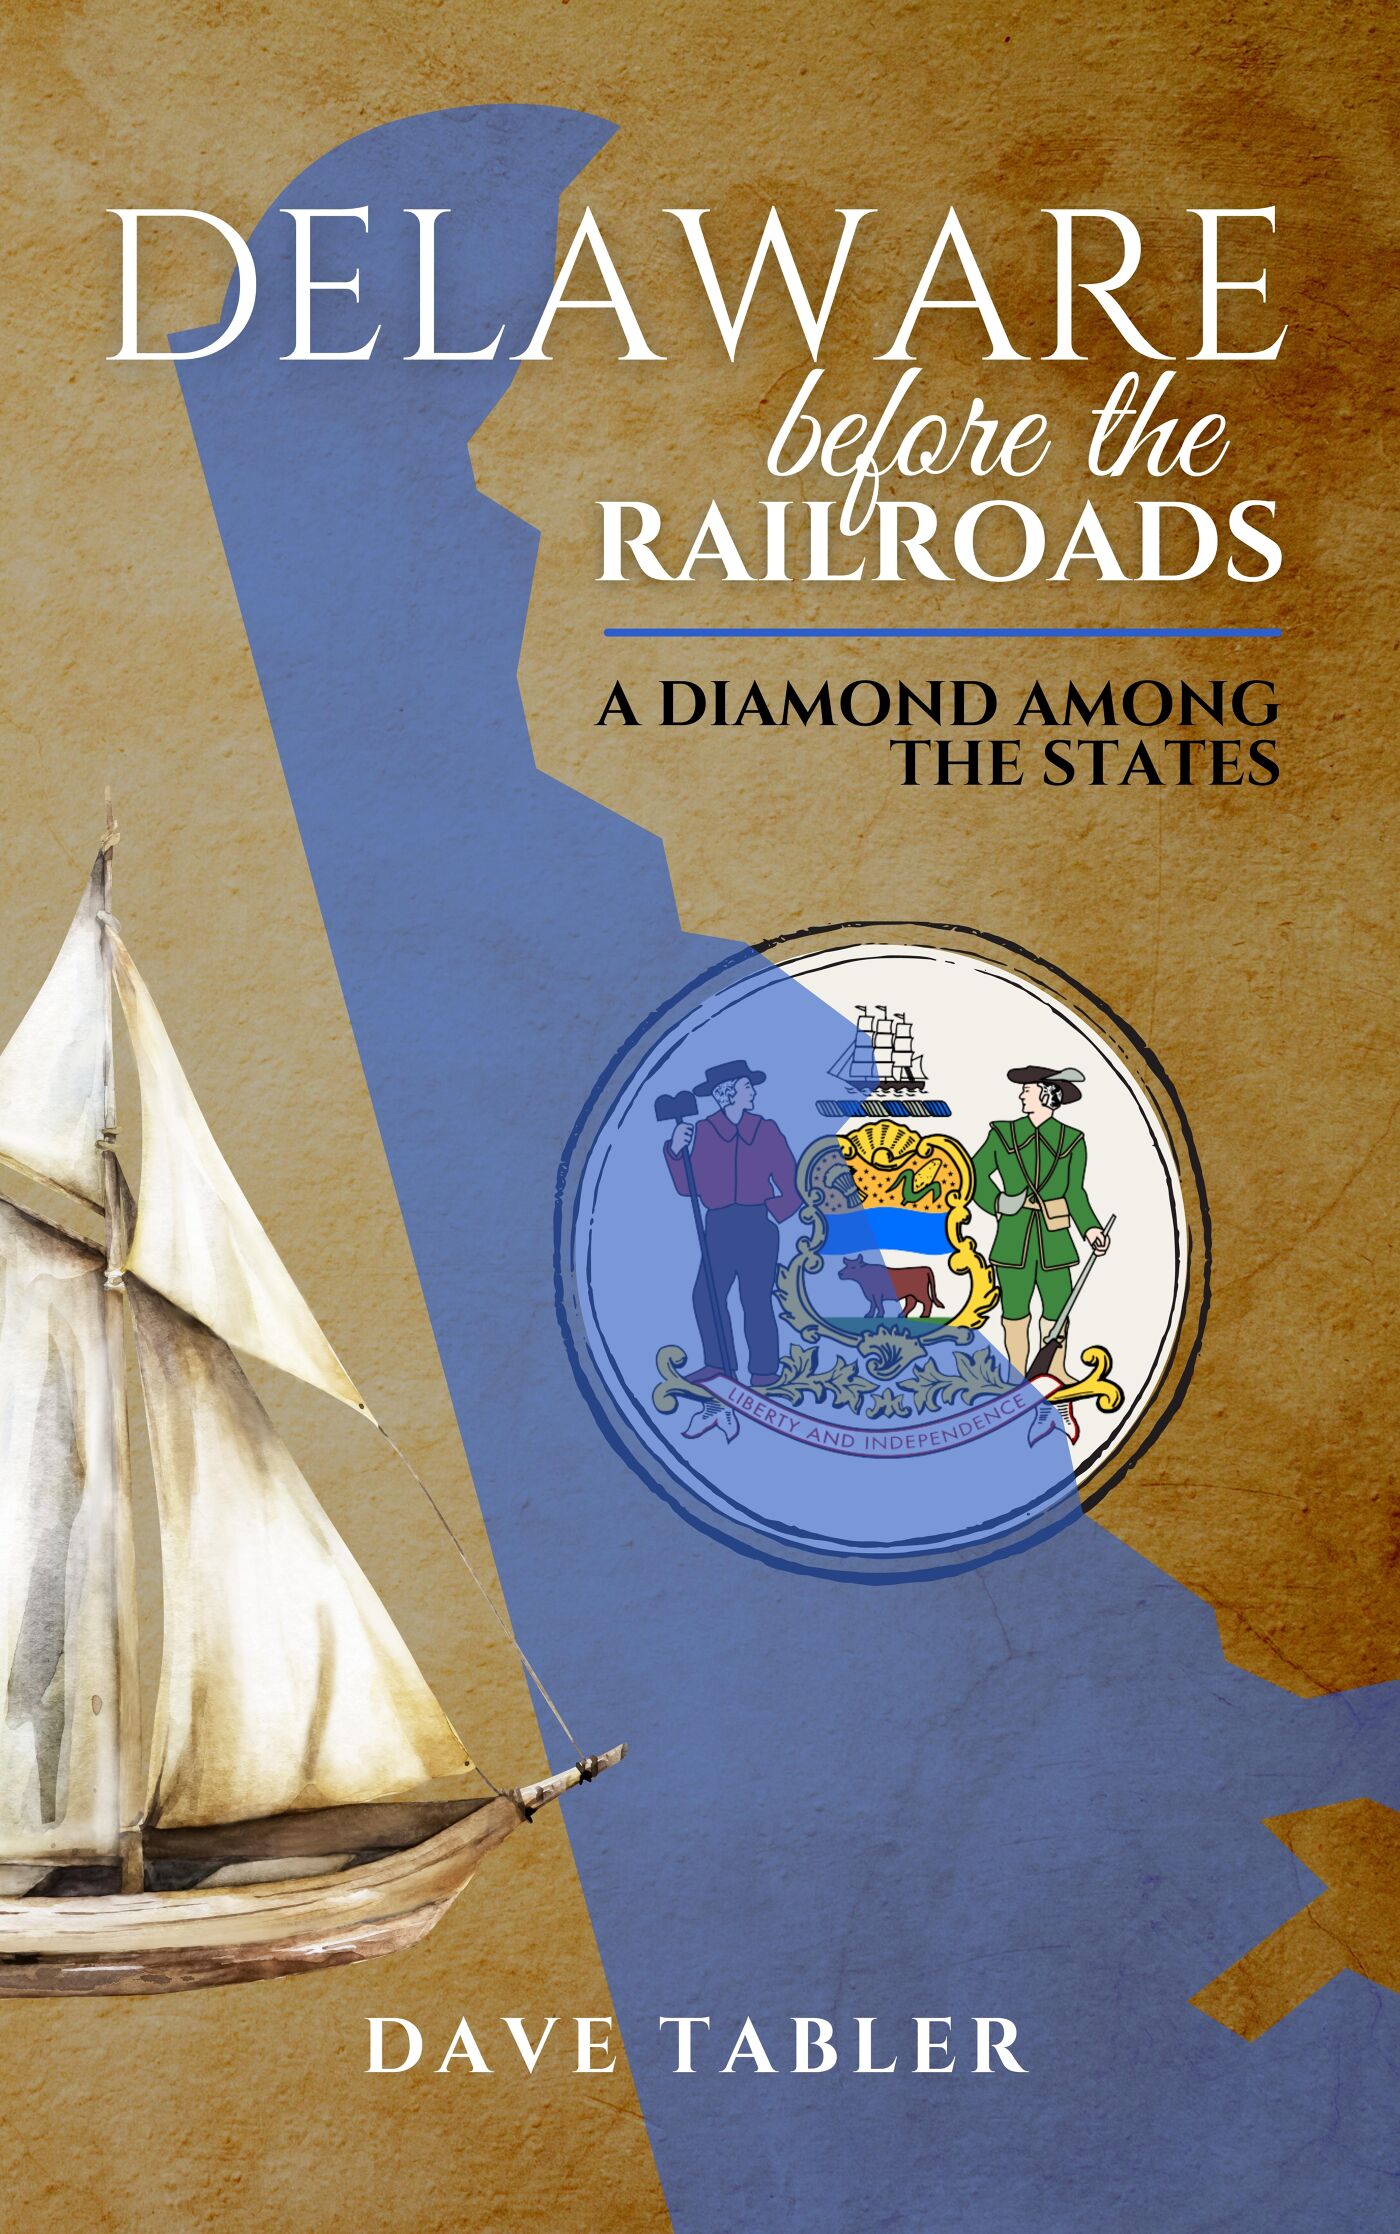 Delaware Before the Railroads: A Diamond Among the States by Dave Tabler